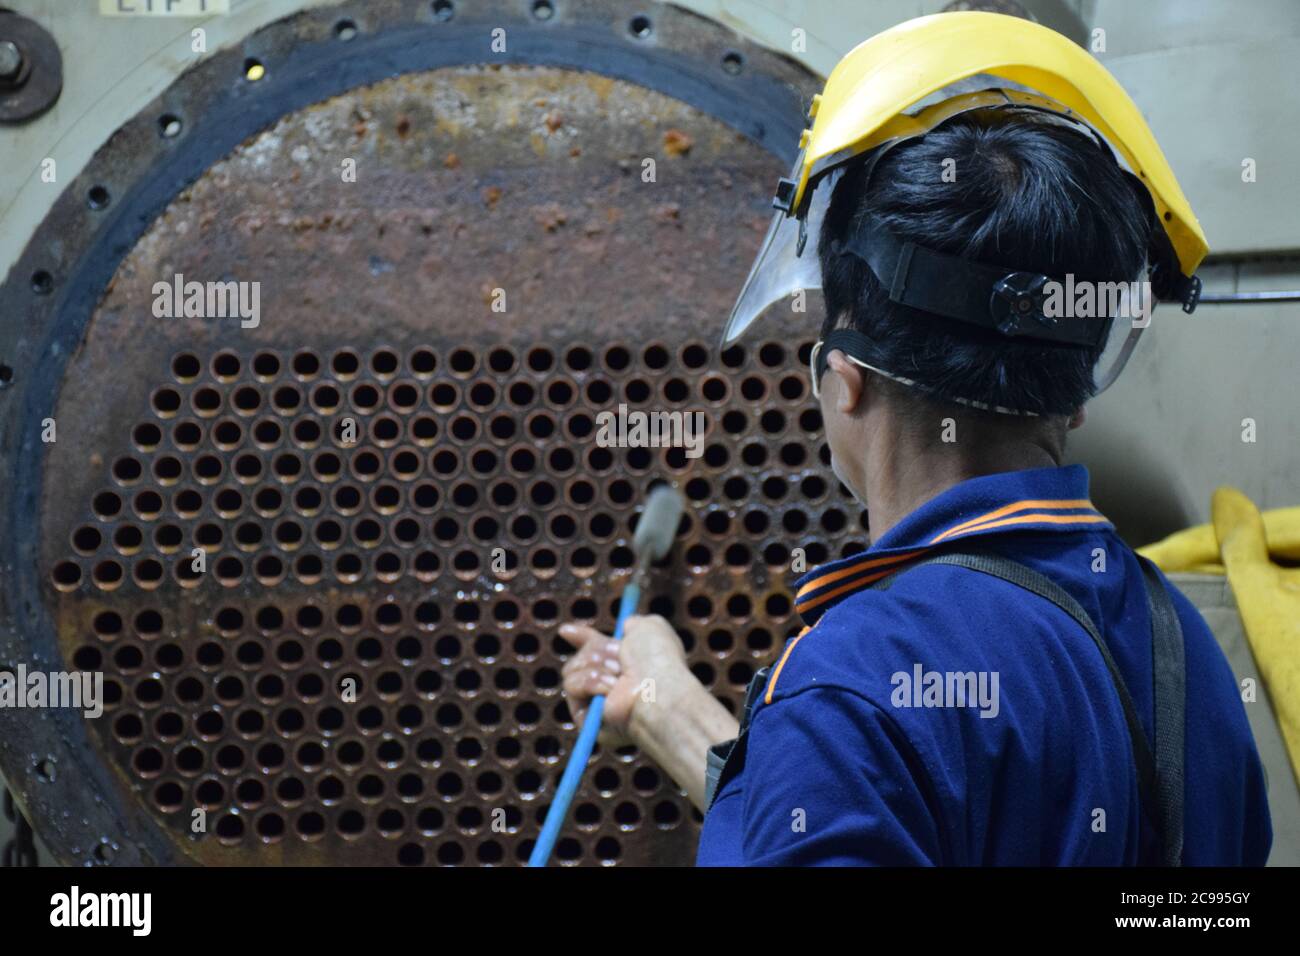 Mechanic is using brush to clean condenser tube of Chiller - HVAC System. Stock Photo